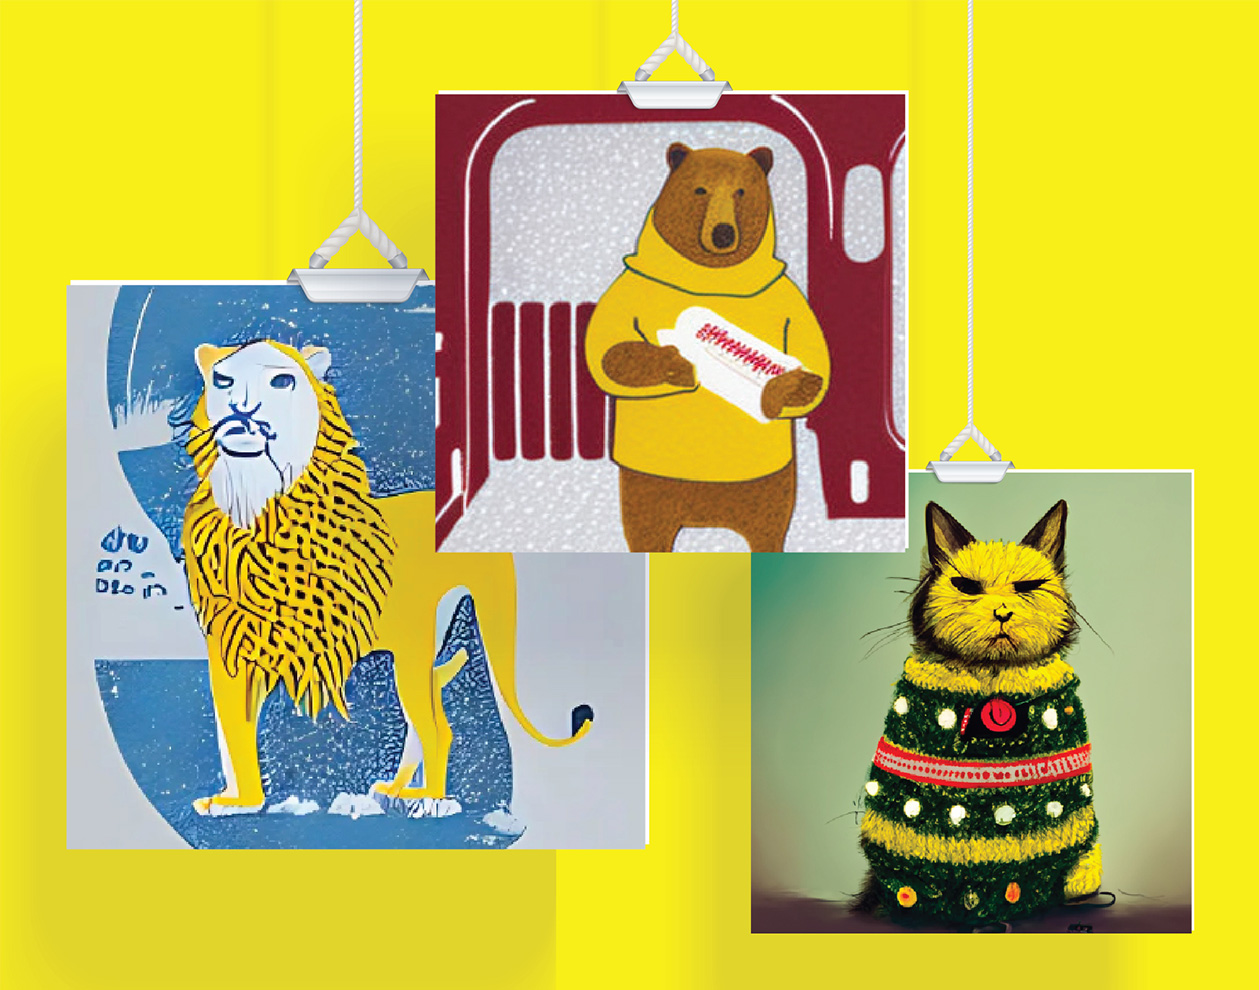 A.I. generated images of a lion, a bear in sweater, and a cat in Christmas Sweater.